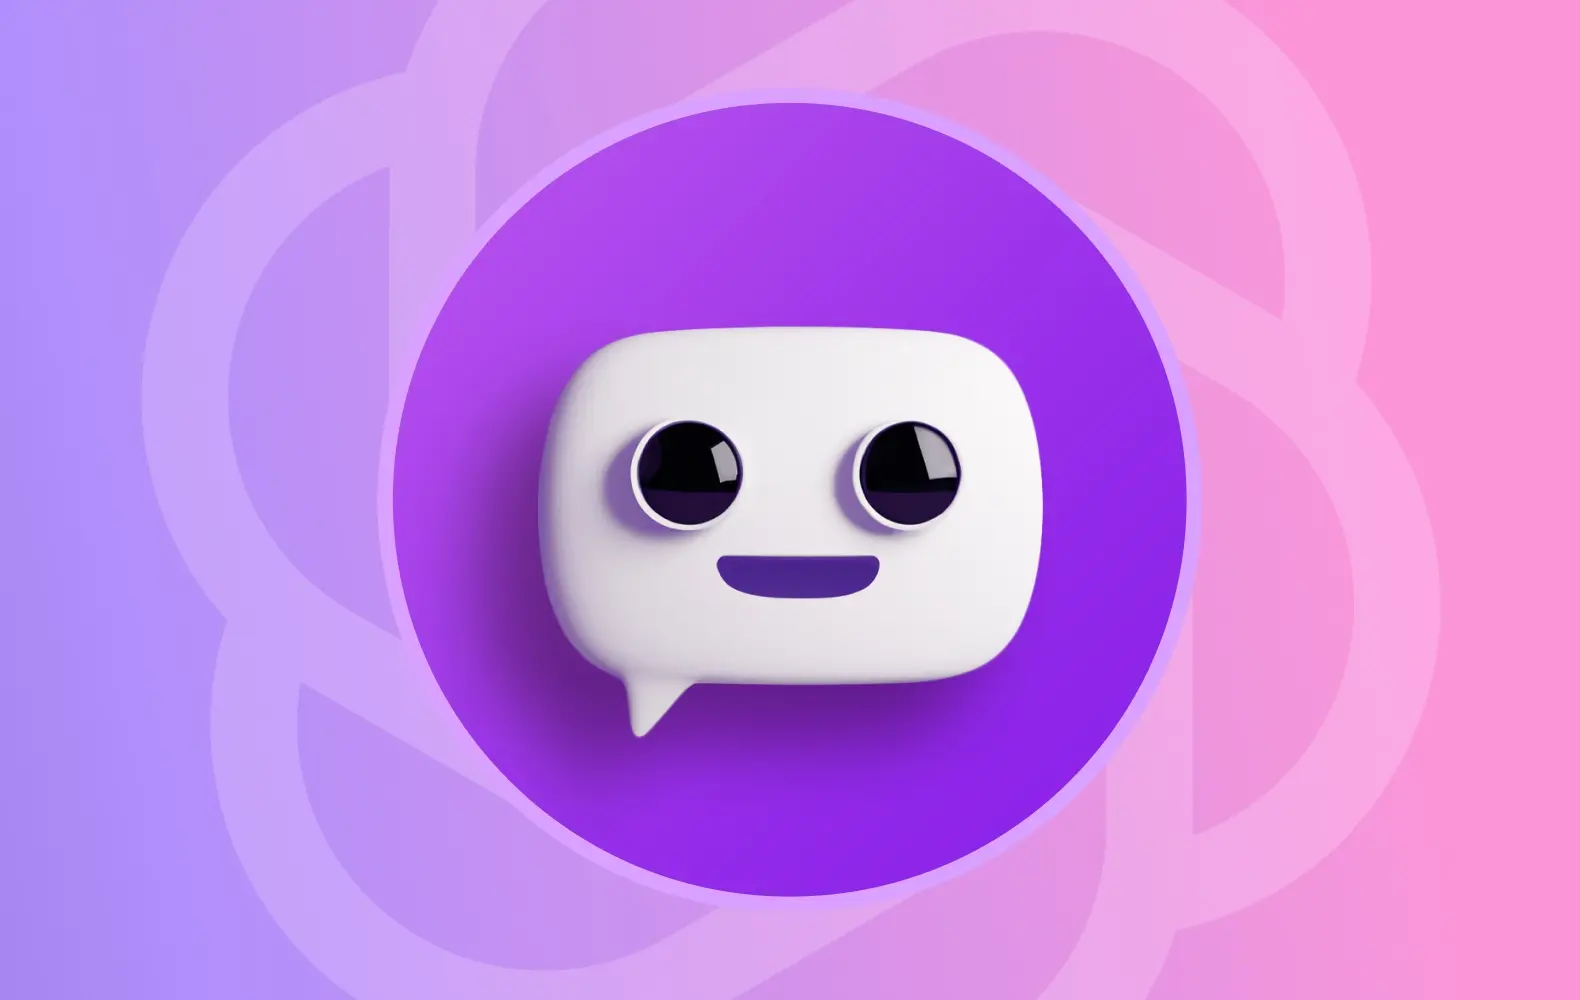 An image of a smiling 3D chat bubble, set on a purple and pink circular background. 